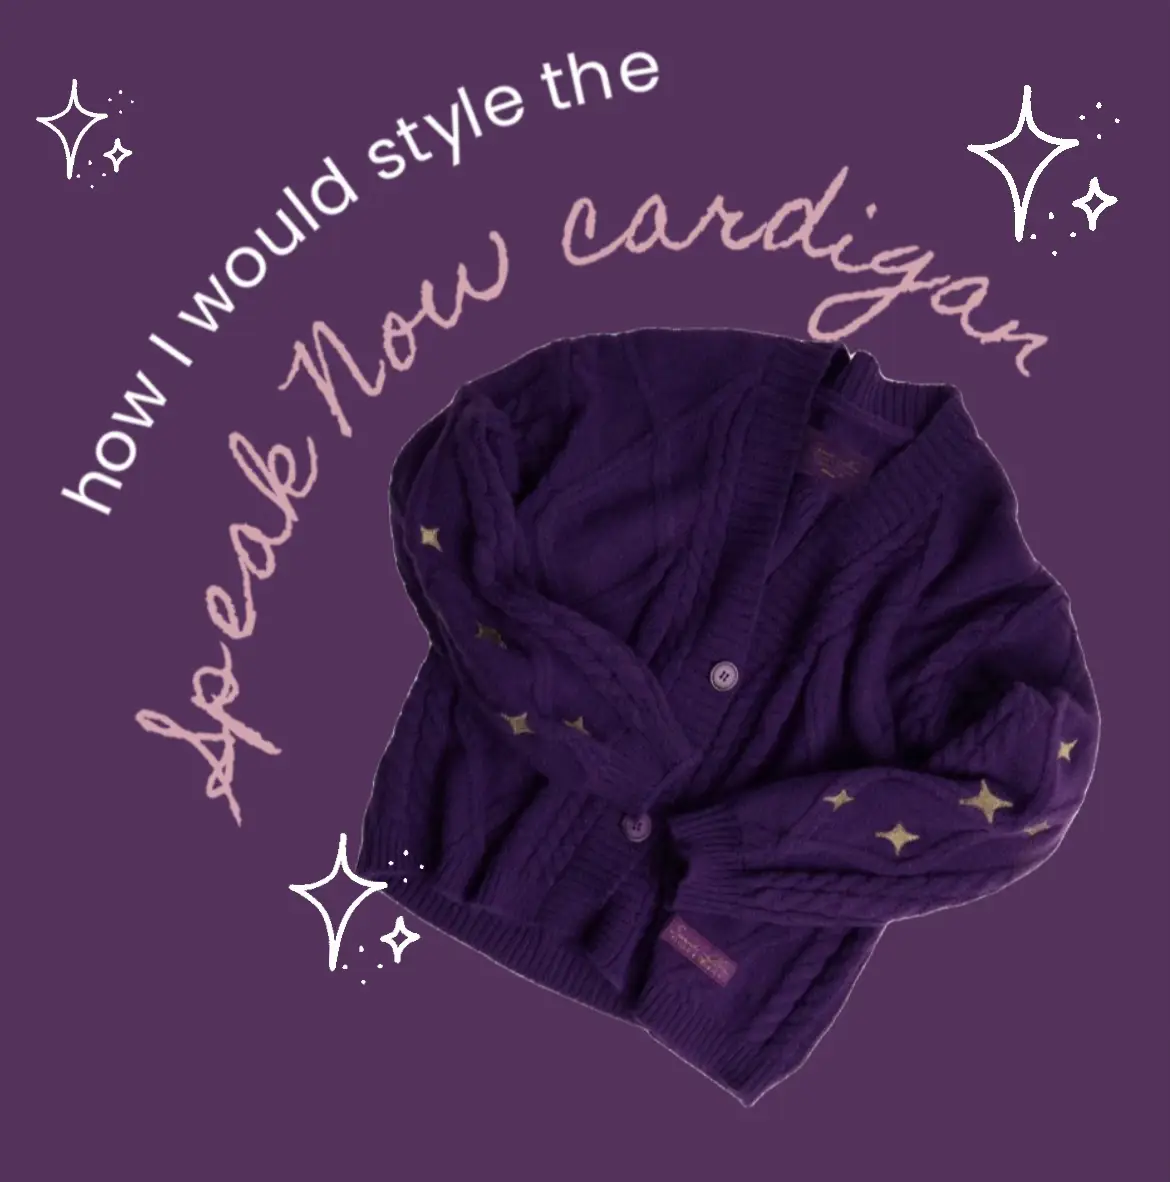 Let's look at the Taylor Swift cardigans in honor of Taylor's month: A, Speak Now Cardigan